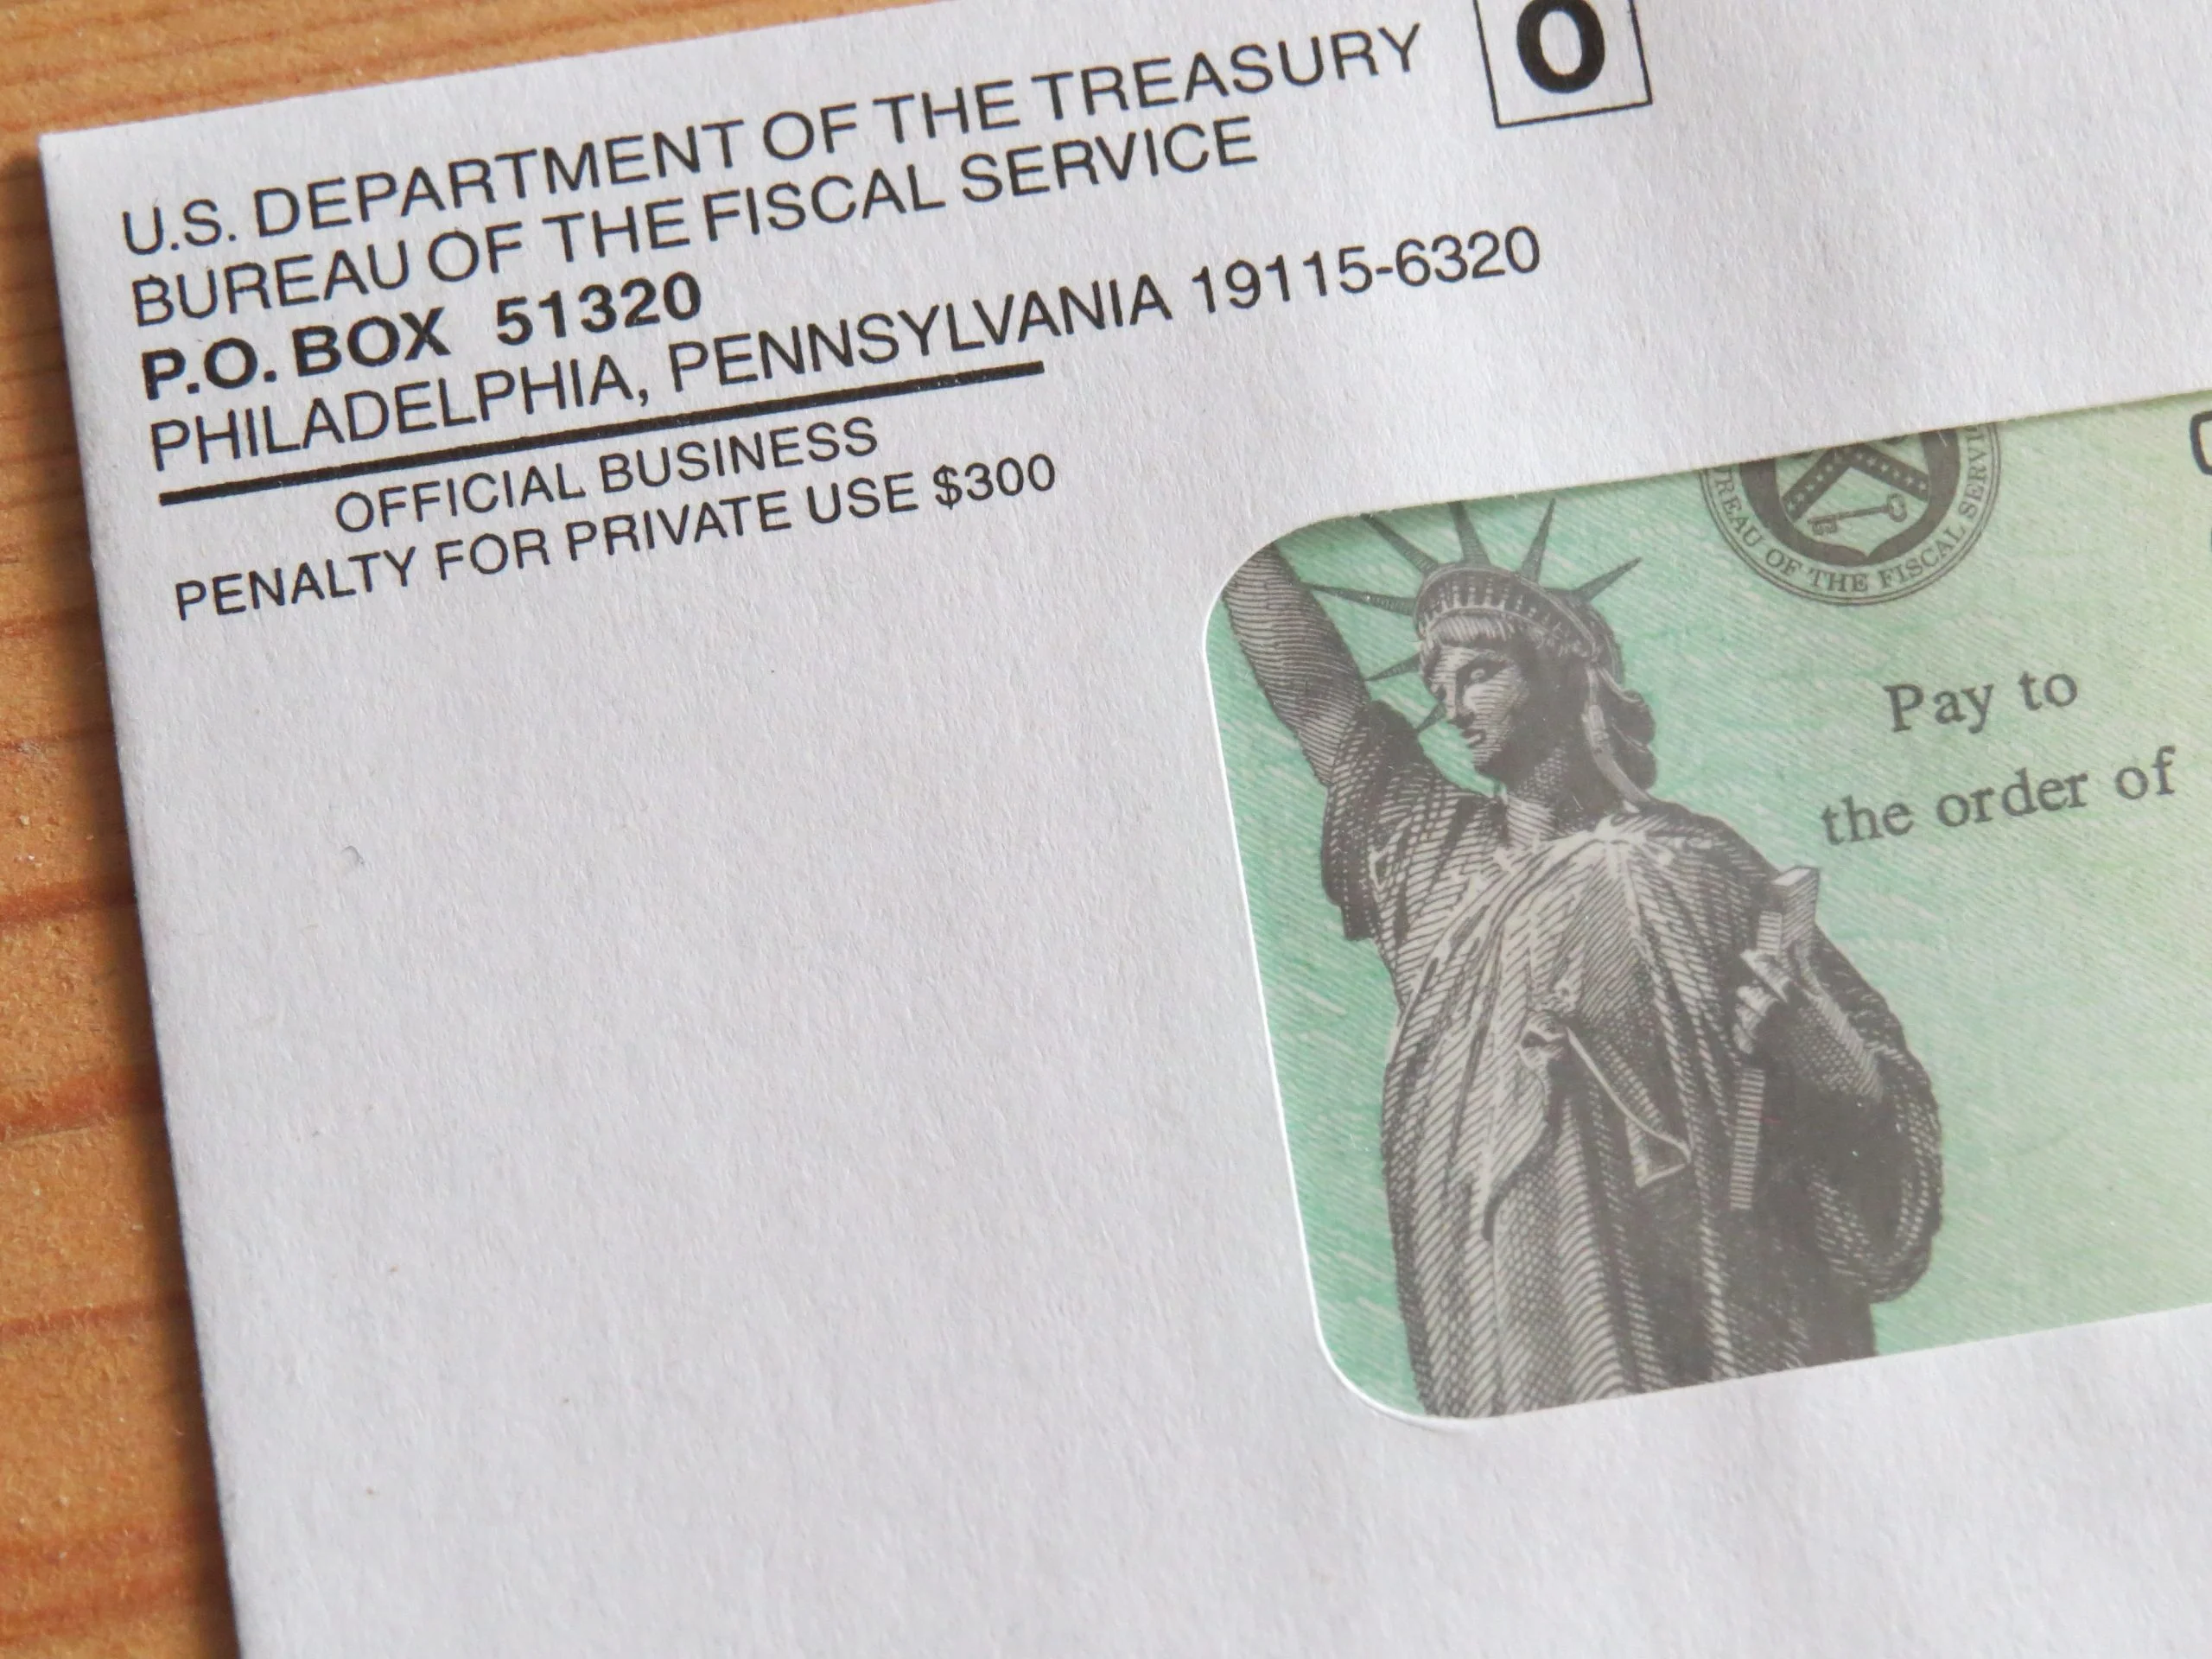 an envelope from the u.s. department of the treasury